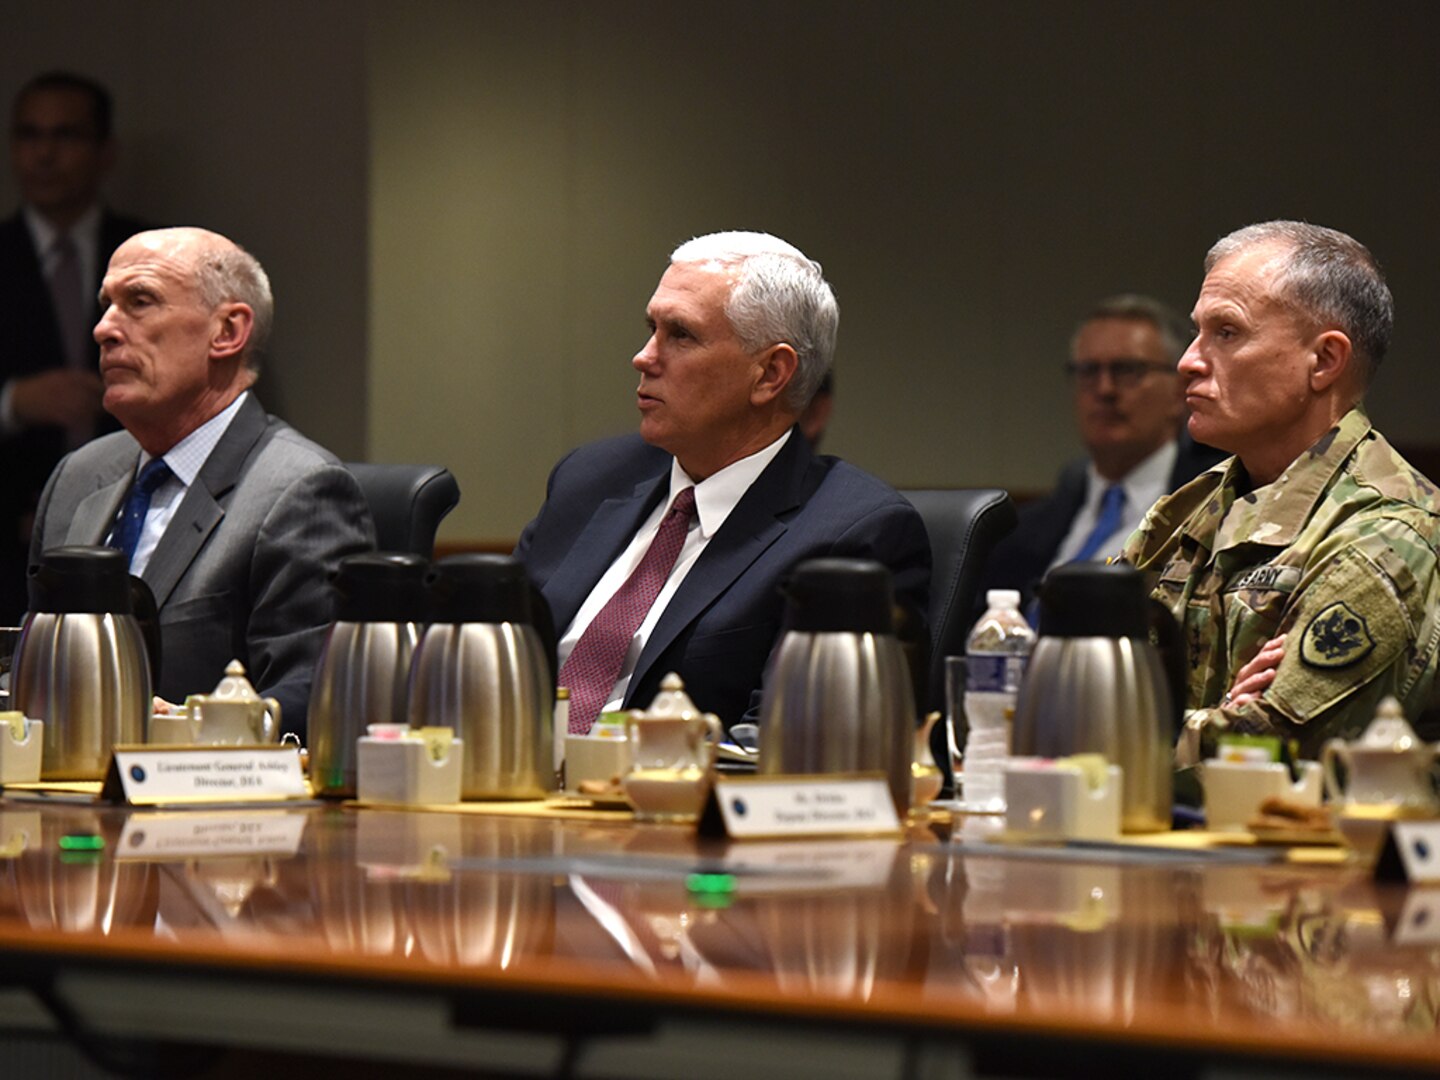 From left, Director of National Intelligence Dan Coats, Vice President Mike Pence and Defense Intelligence Agency Director Lt. Gen. Robert Ashley listen to an intelligence brief during the vice president’s visit to DIA headquarters Nov. 6, at Joint Base Anacostia-Bolling in Washington, D.C.